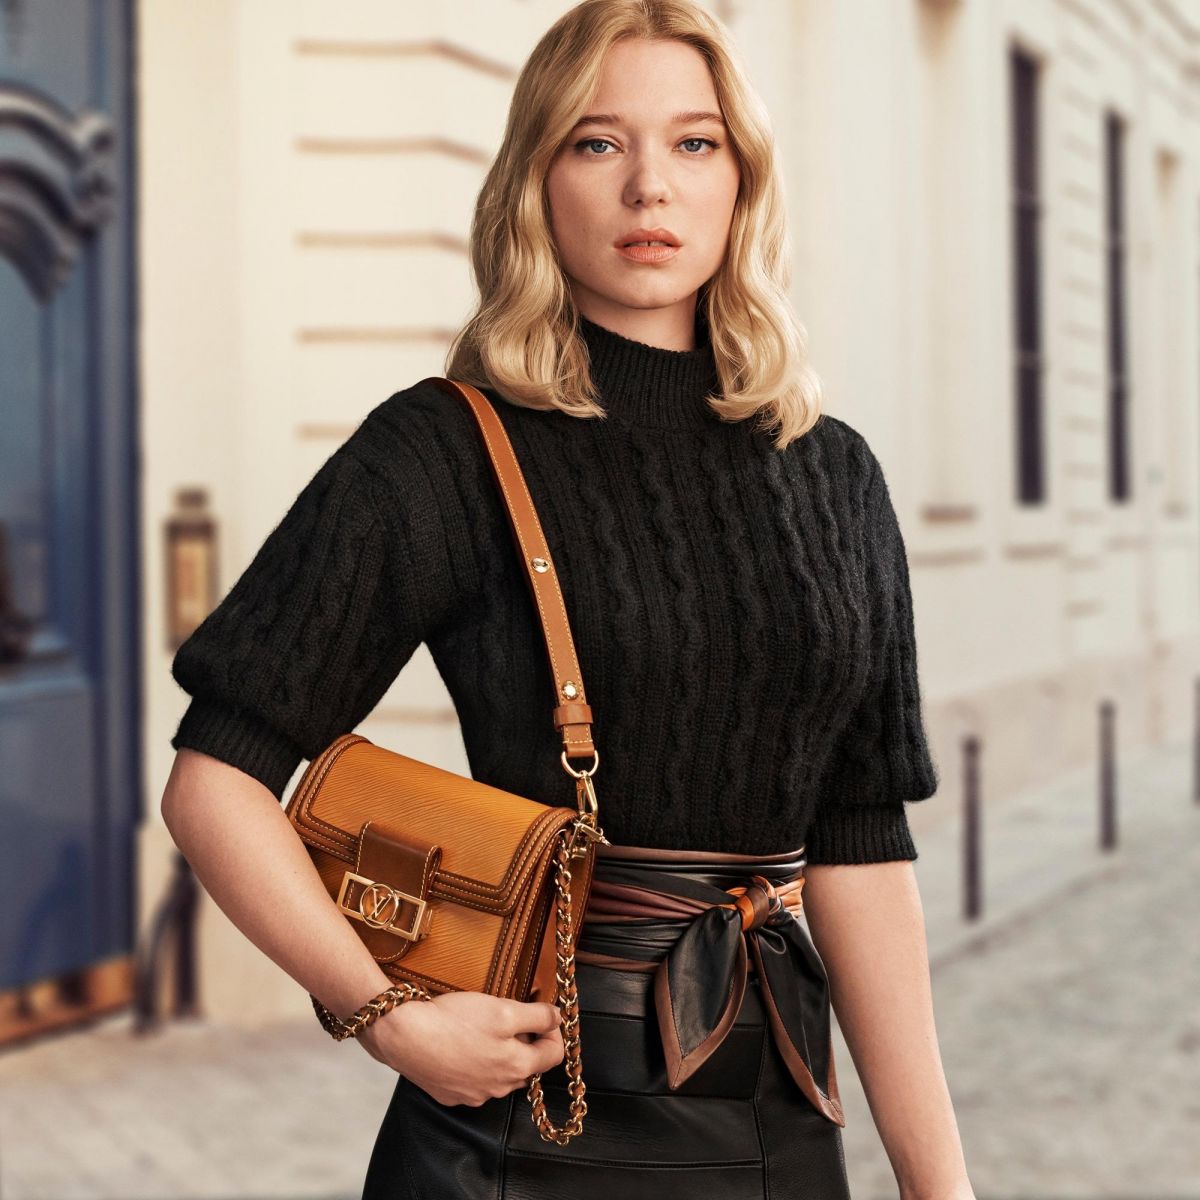 H o l l y w o o d  F a s h i o n — Lea Seydoux in Louis Vuitton at the  2020 Vanity